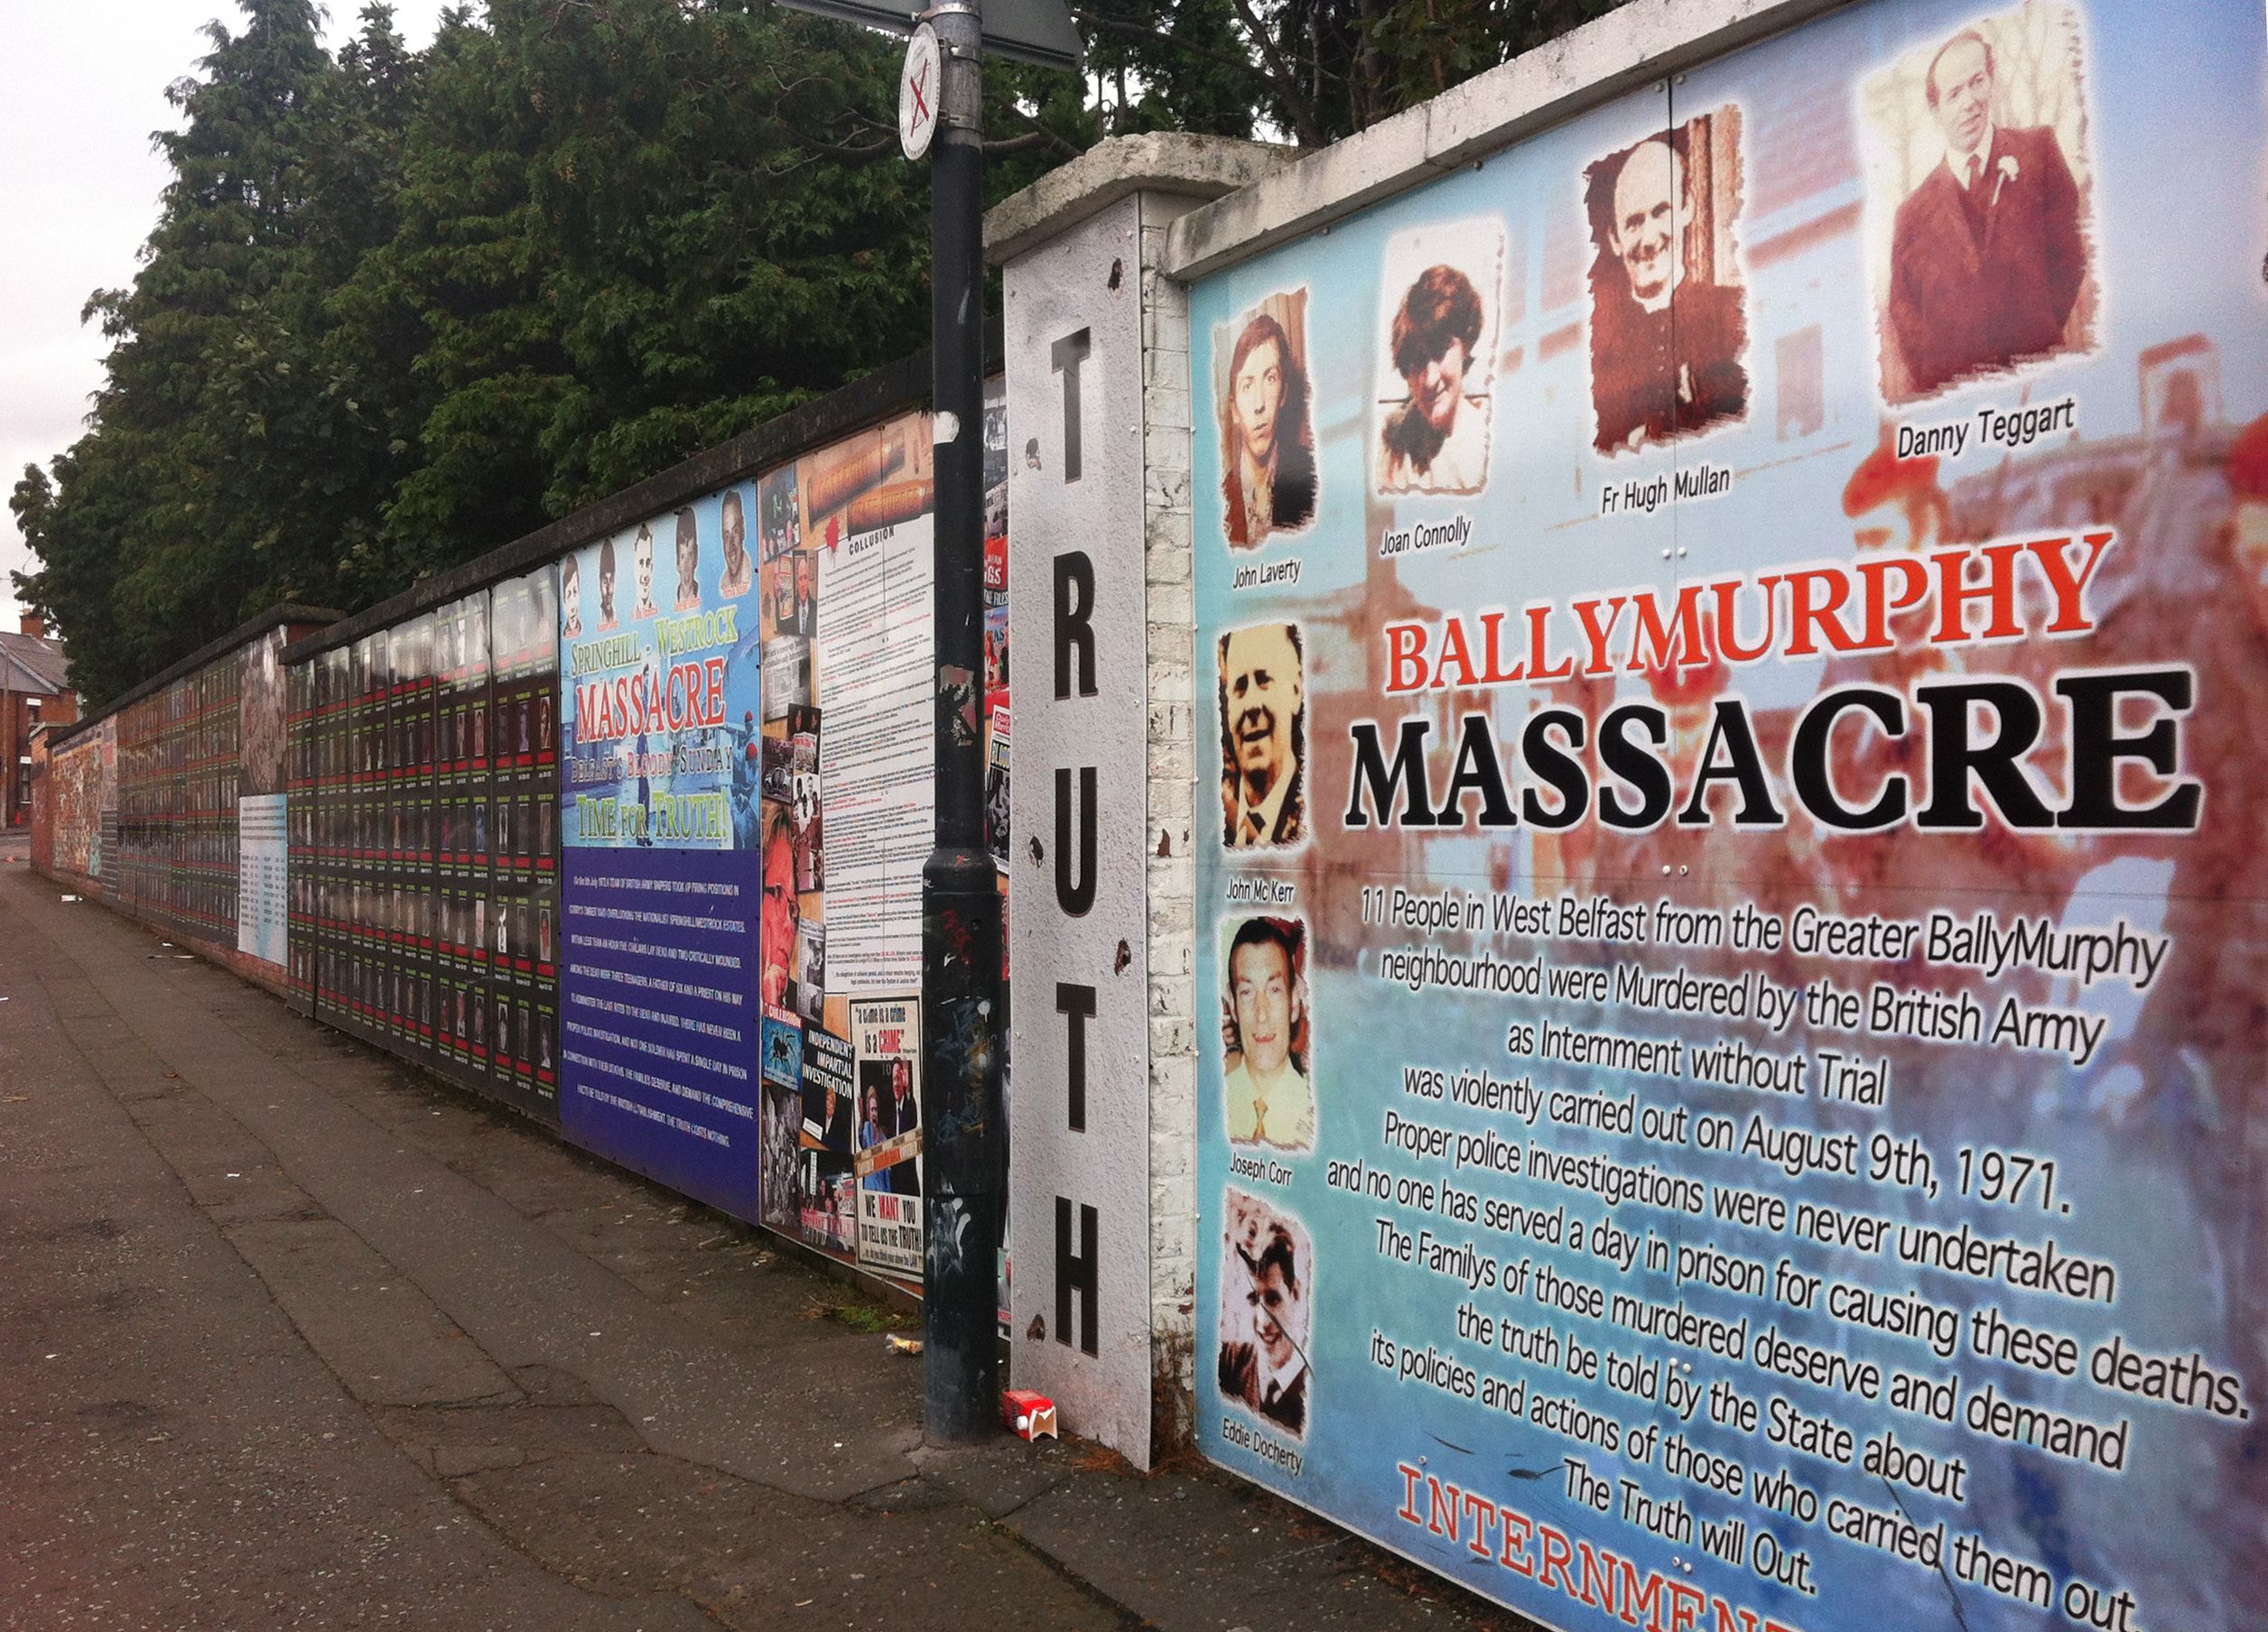 Mural dedicated to the victims of the Ballymurphy massacre. Image by Keith Ruffles. United Kingdom, 2013.